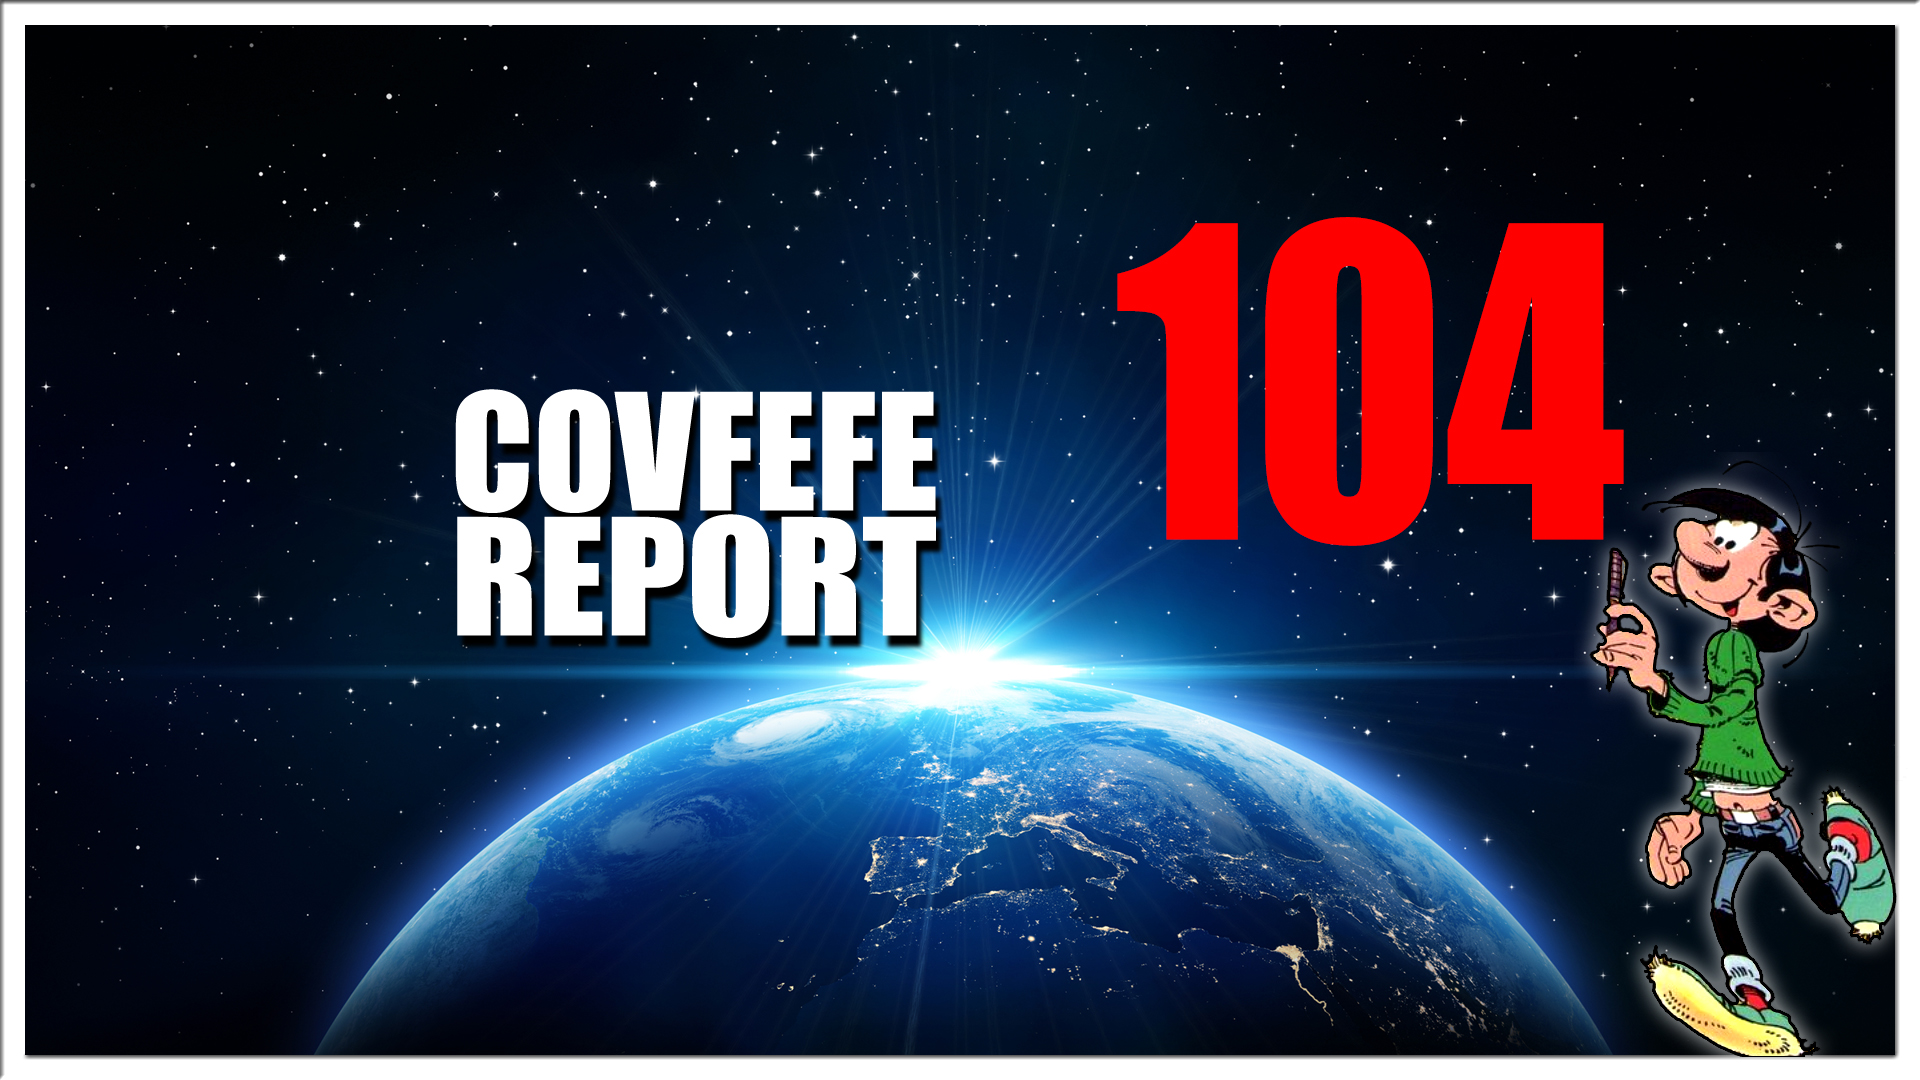 Covfefe Report 104. Qpost, Barr, Macron, Rutte, The Forgotten Wounded